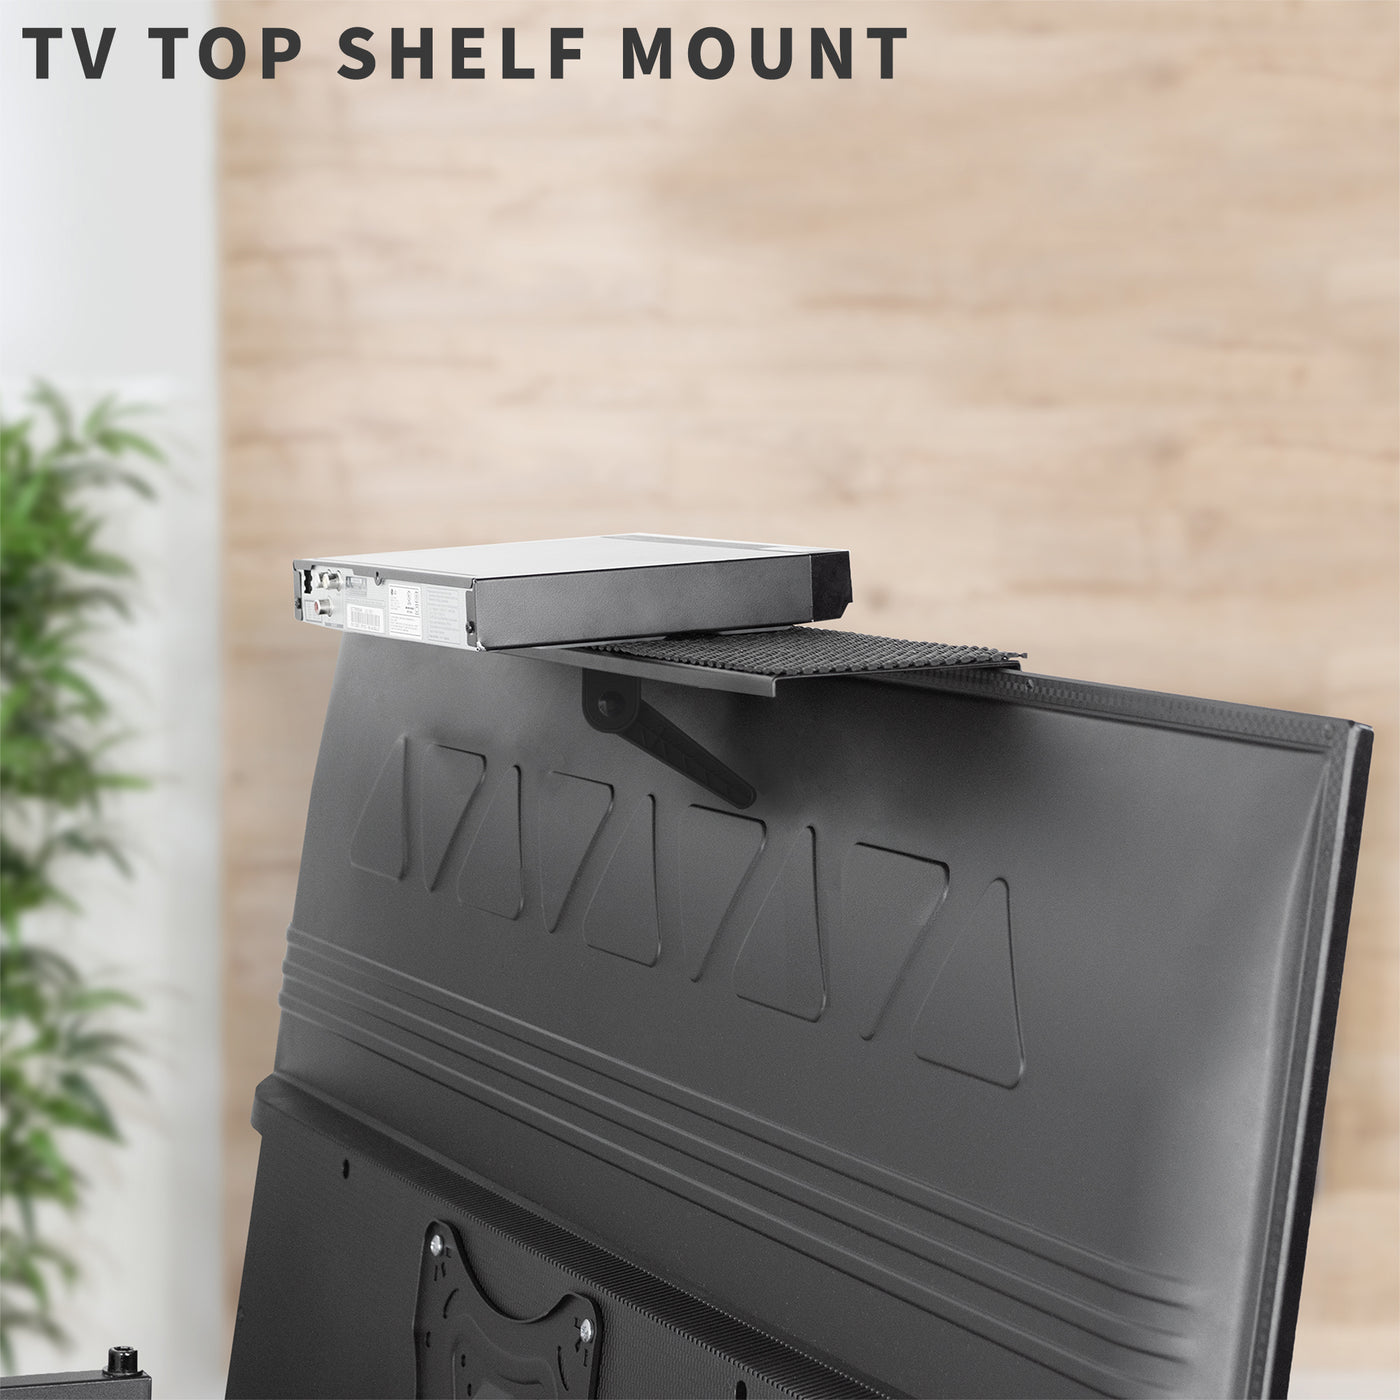 Top shelf TV mount can elevate a variety of items.